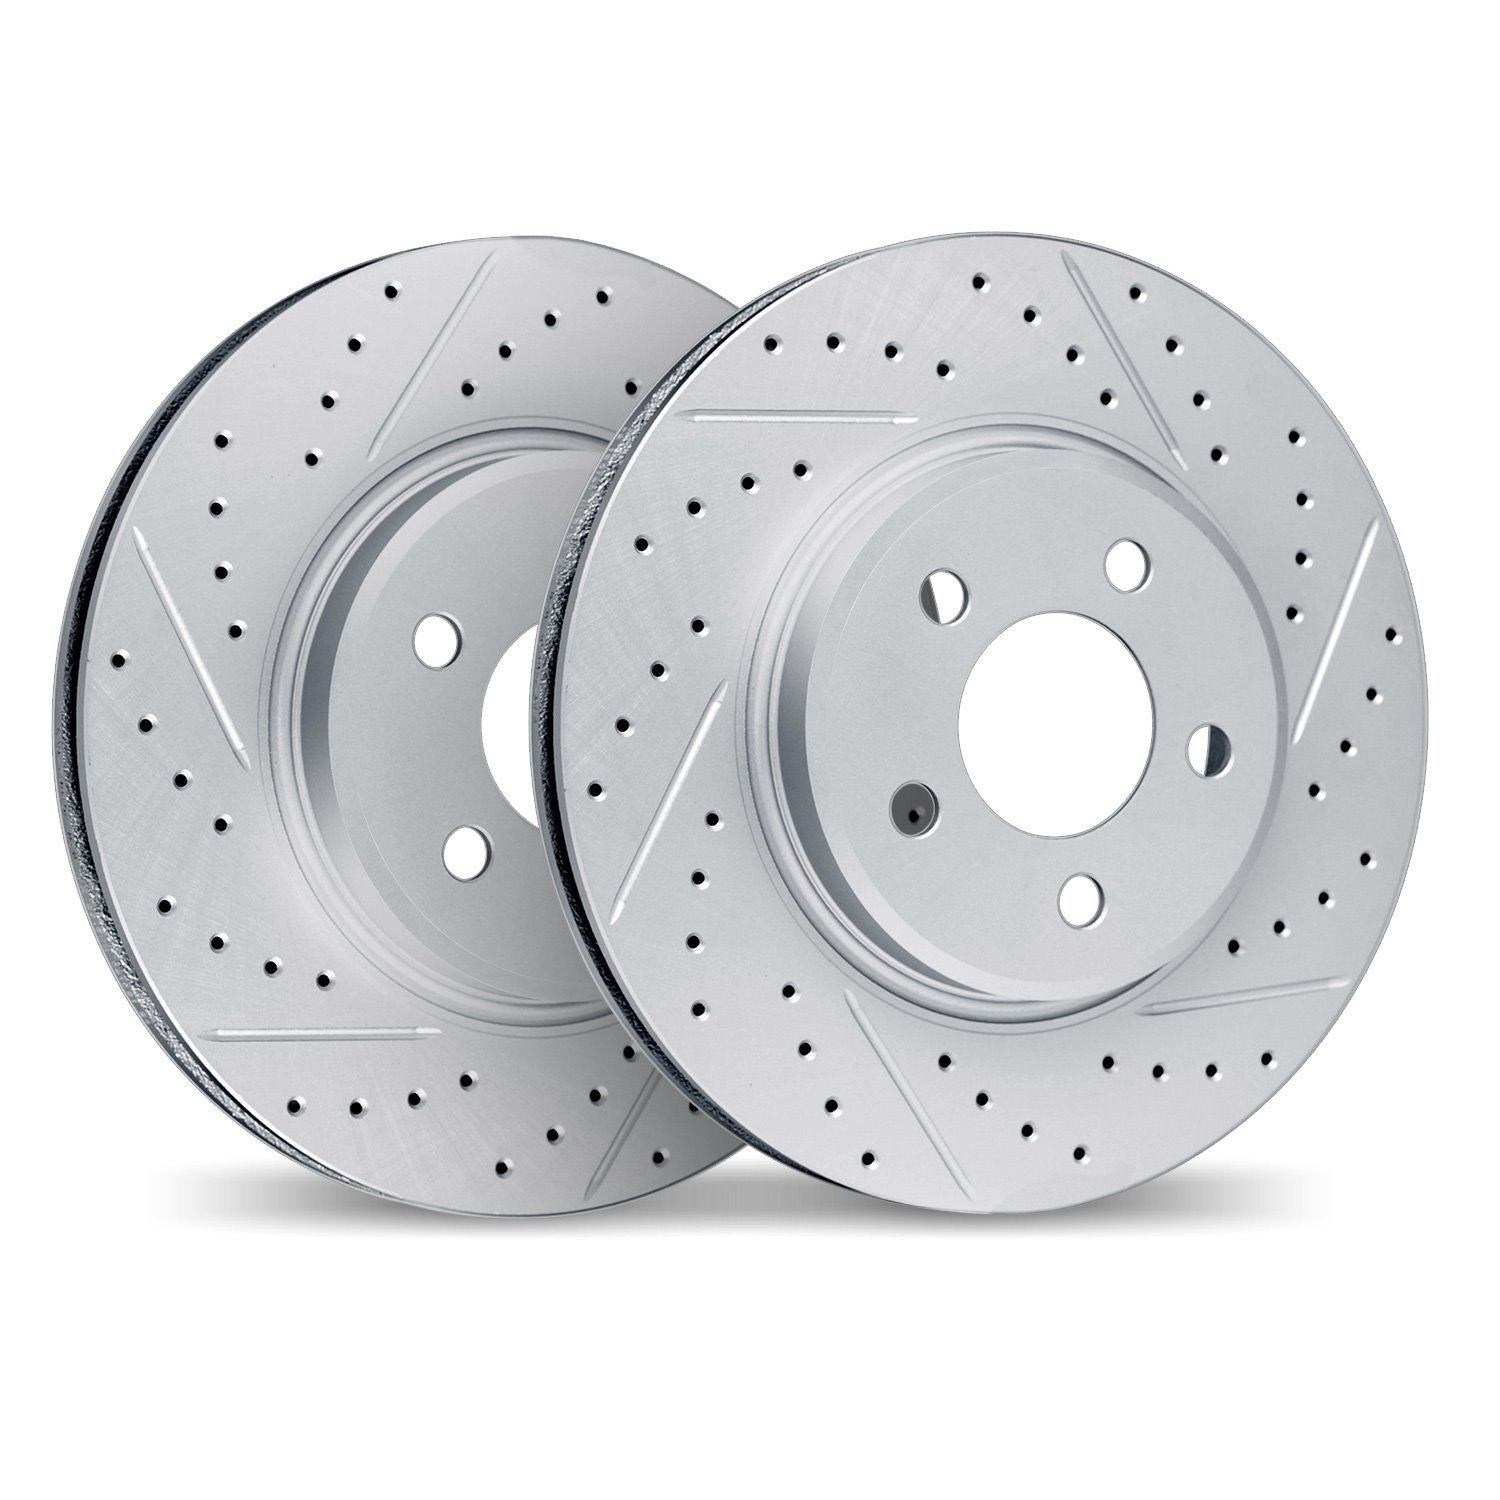 2002-13012 Geoperformance Drilled/Slotted Brake Rotors, Fits Select Subaru, Position: Front